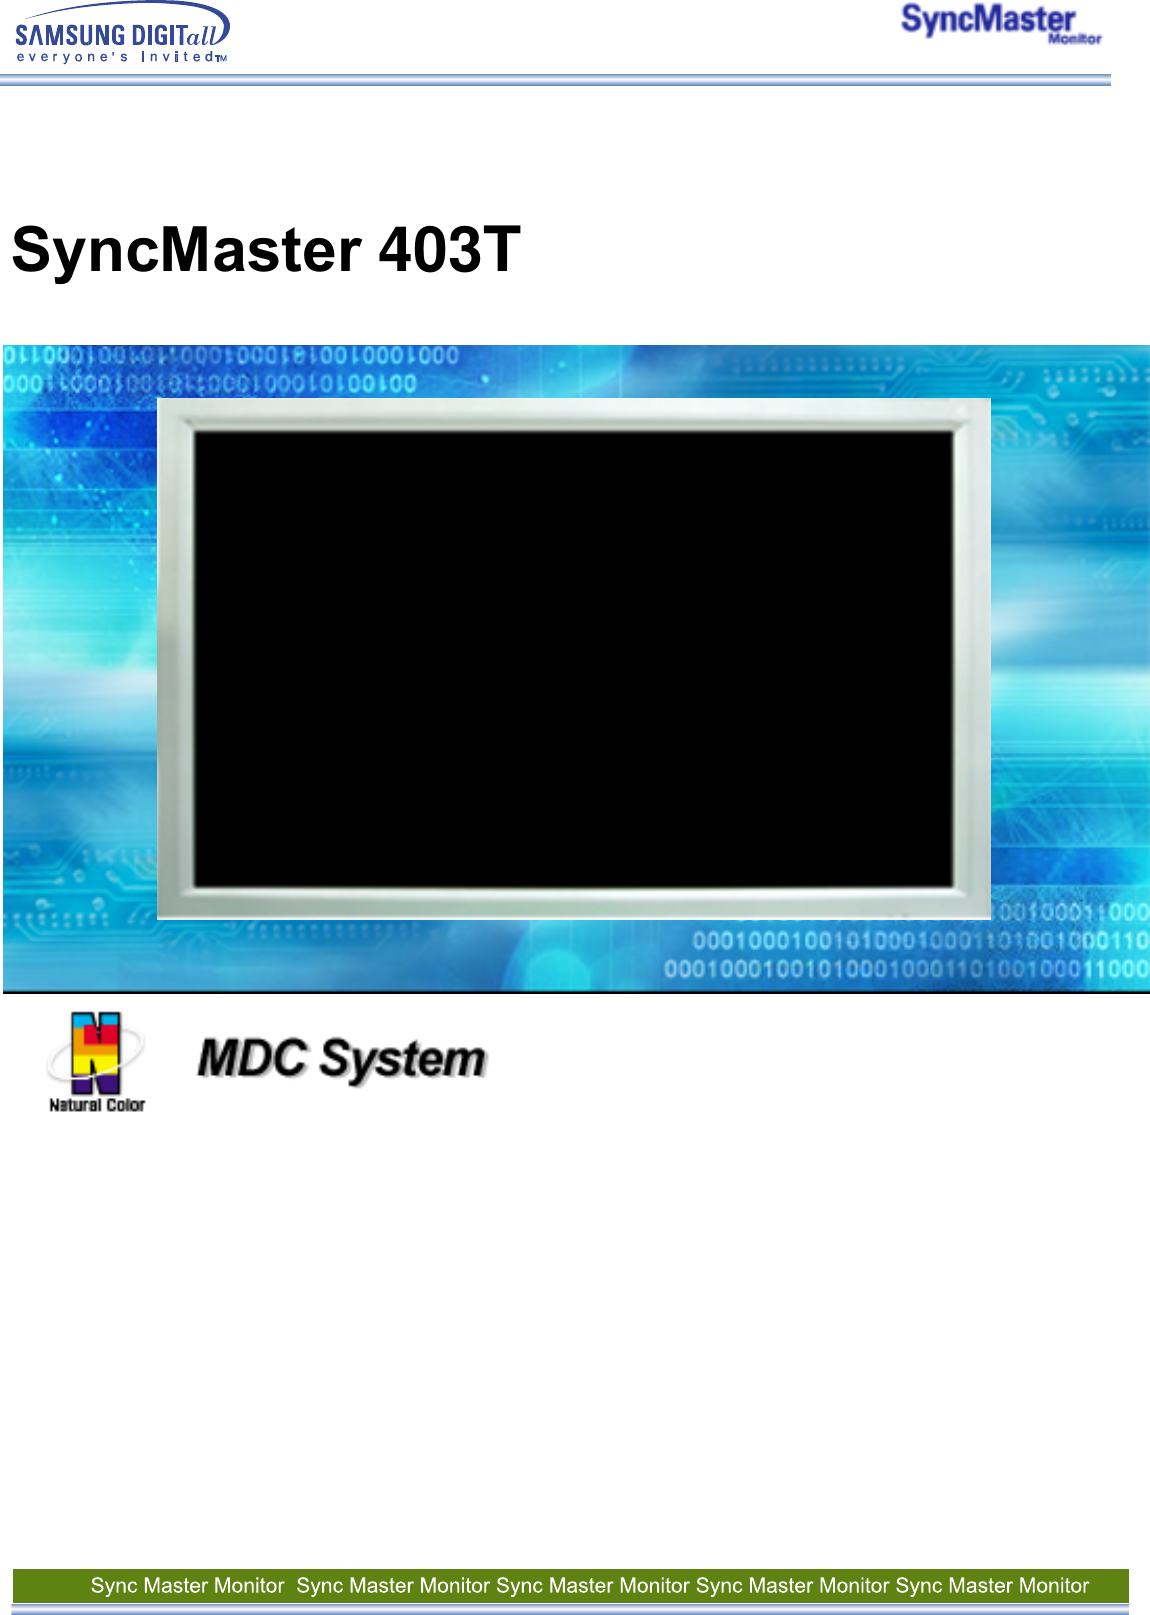  SyncMaster 403T